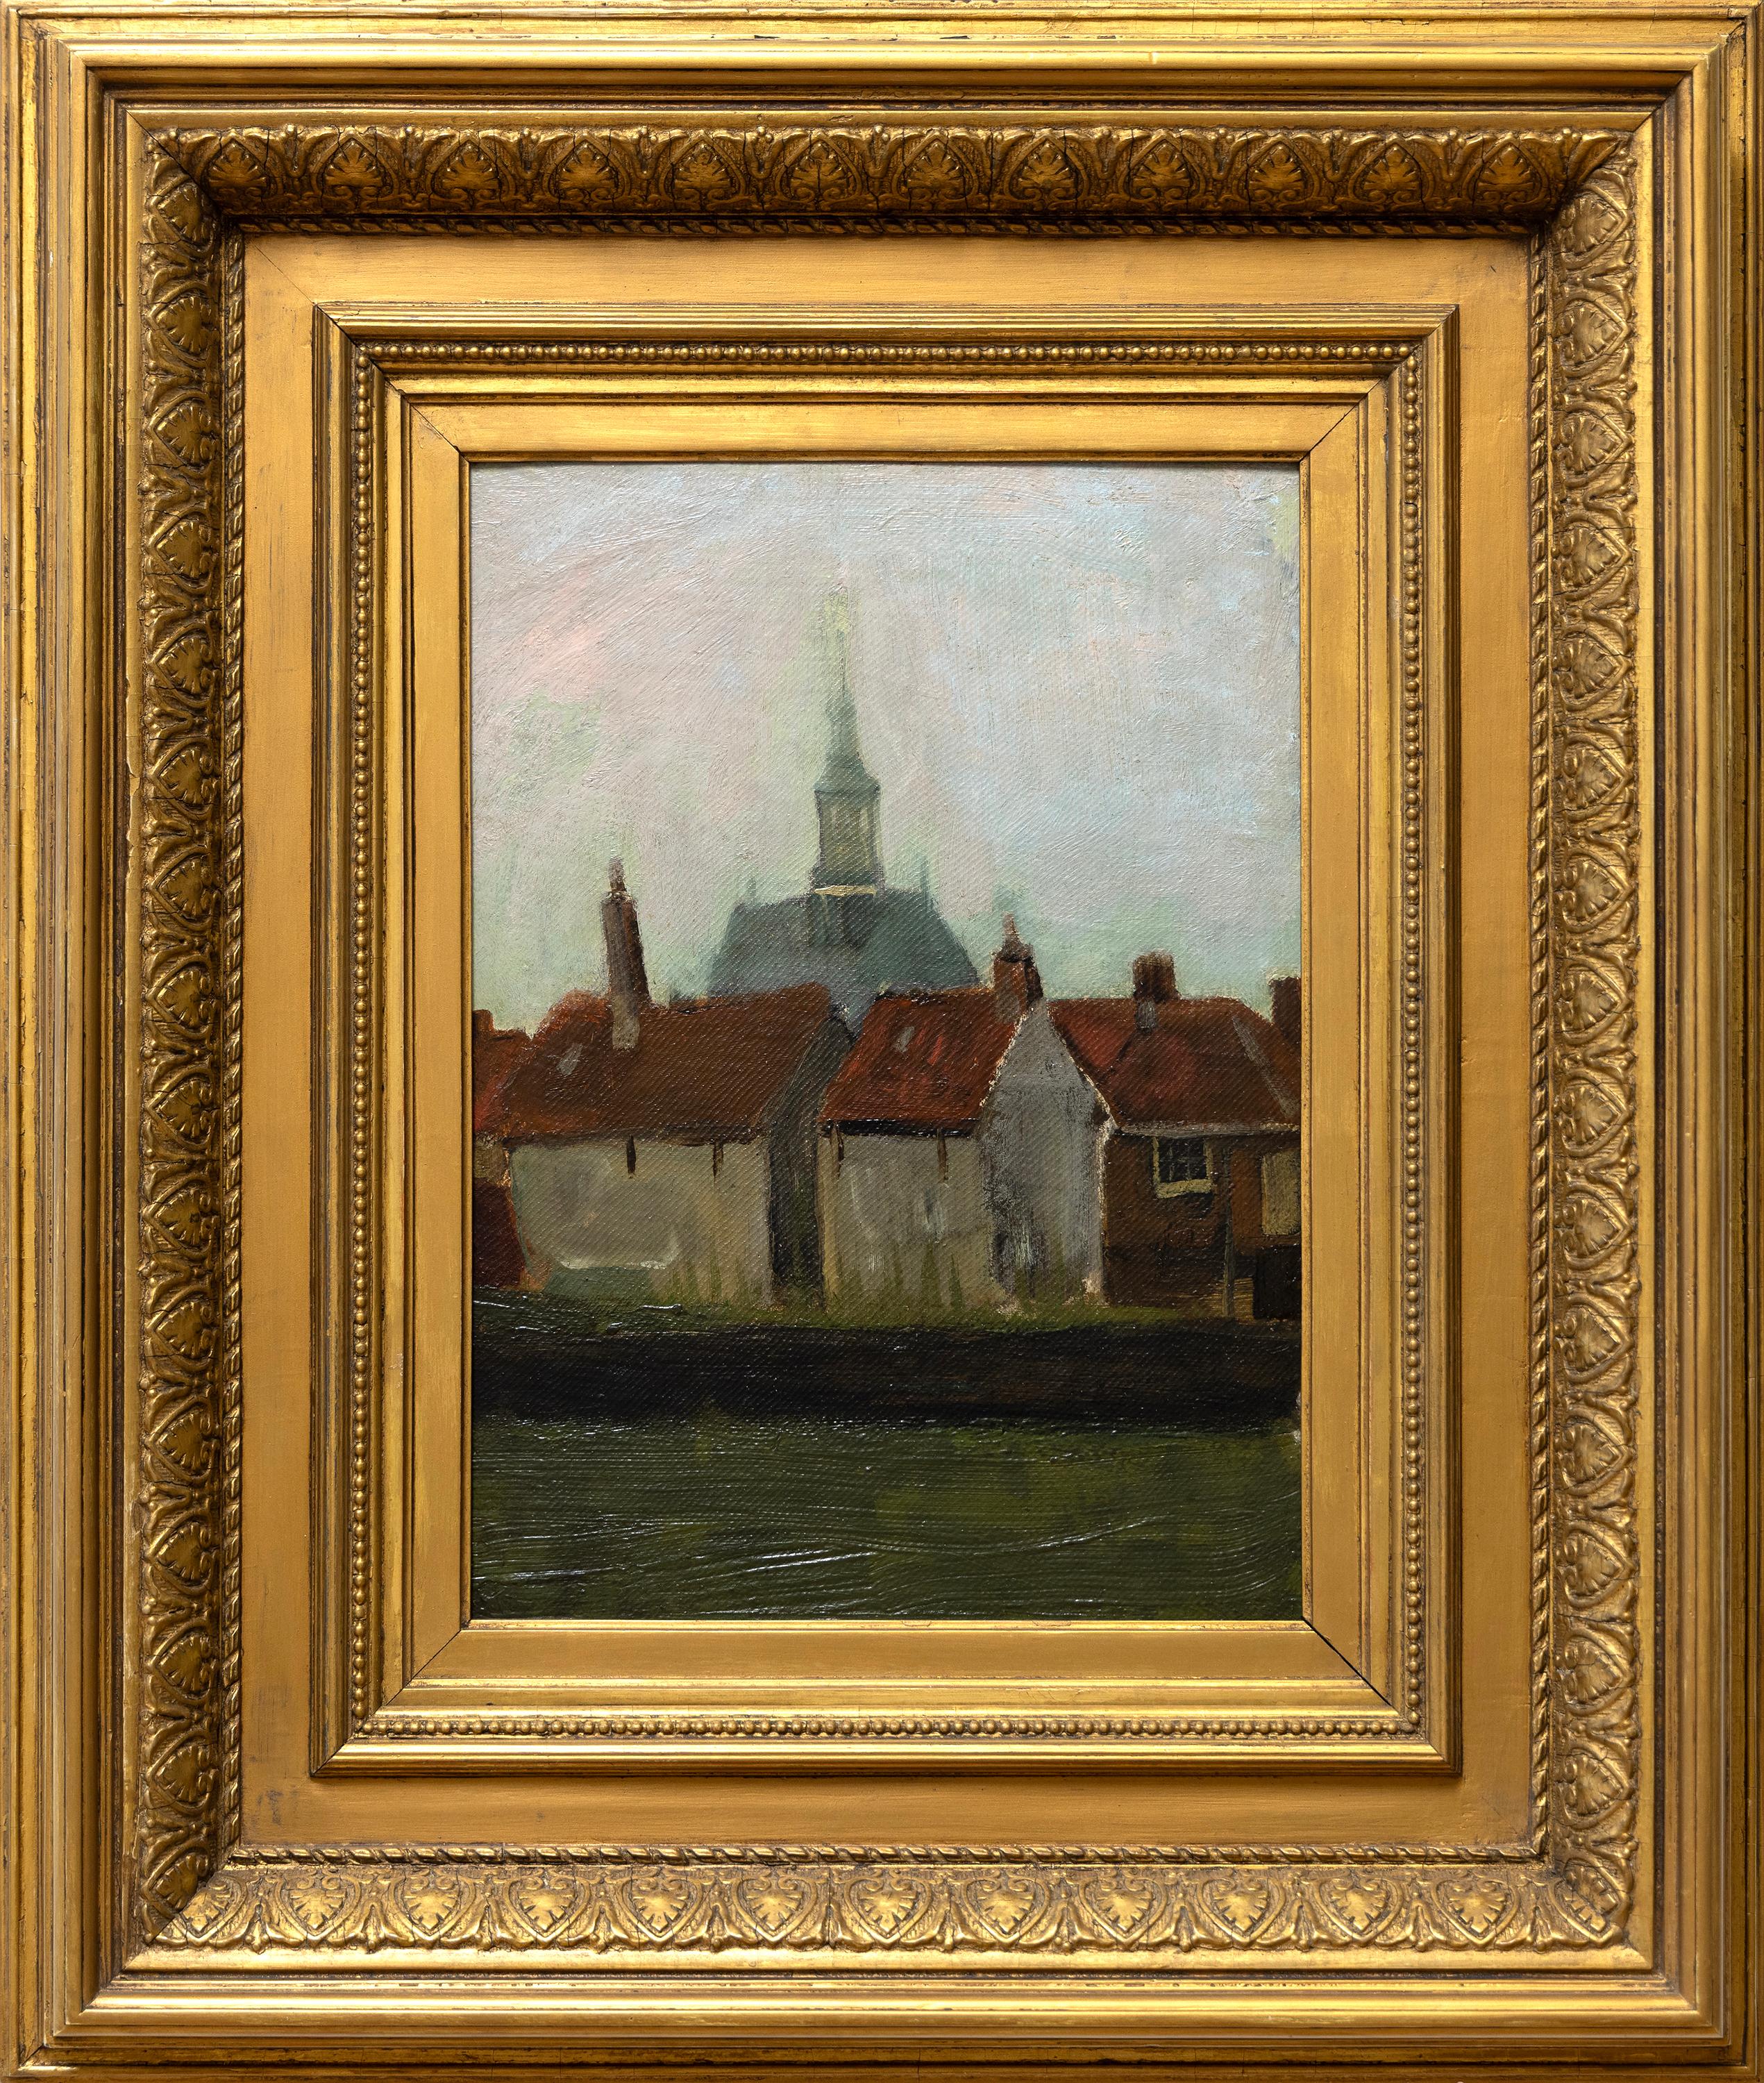 The New Church and Old Houses in the Hague - Painting by Vincent van Gogh